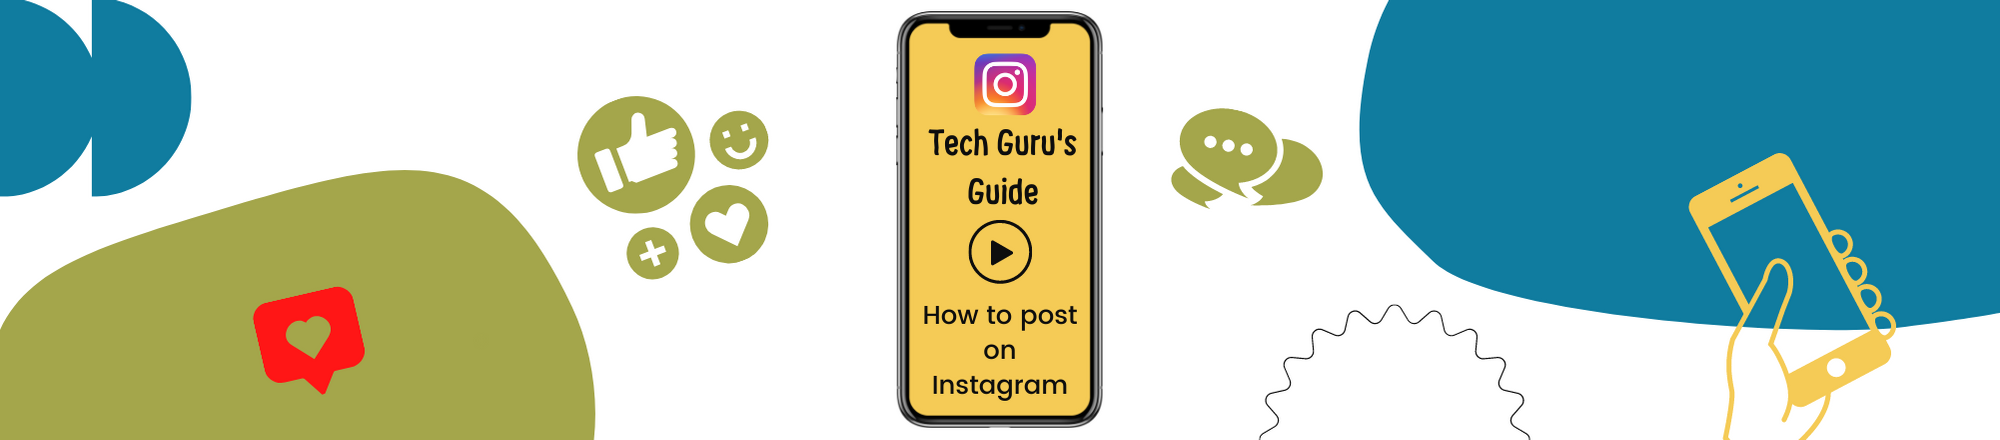 Featured image: Tech Guru's Guide on How to post pictures and videos on Instagram - Read full post: Technology Learning Guide for People with Disability #3